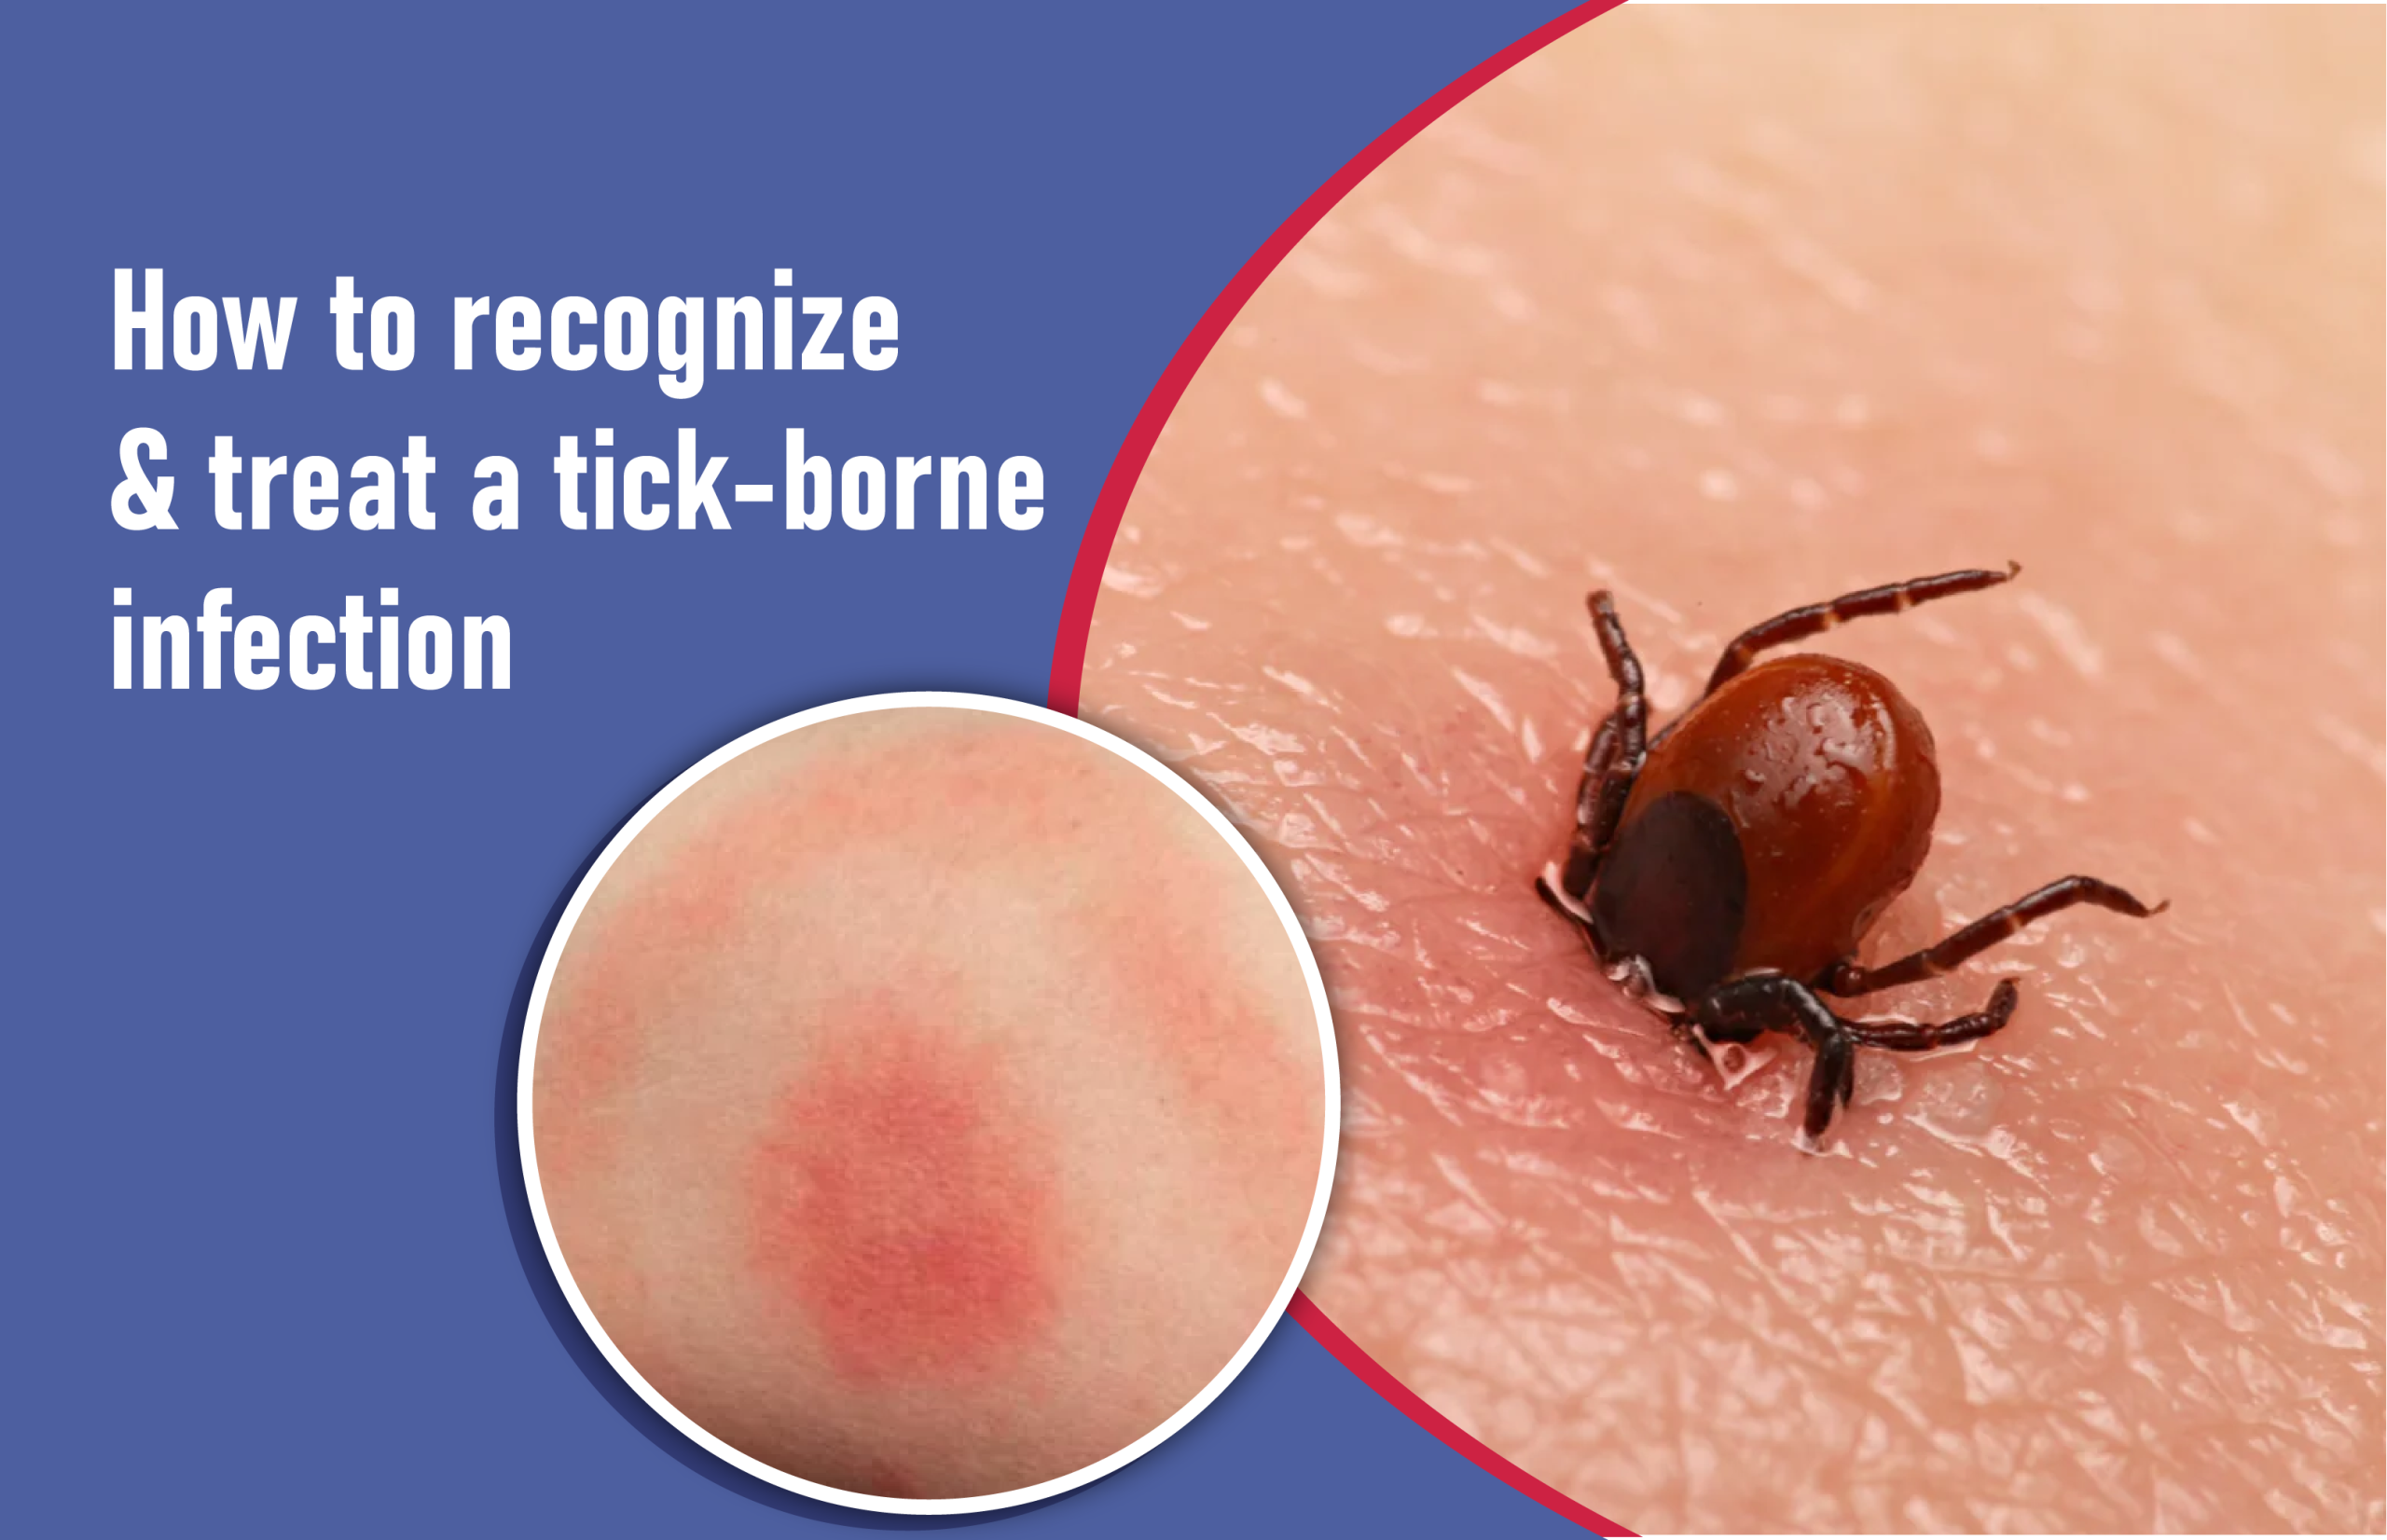 How to Recognize and Treat a Tick-borne Infection